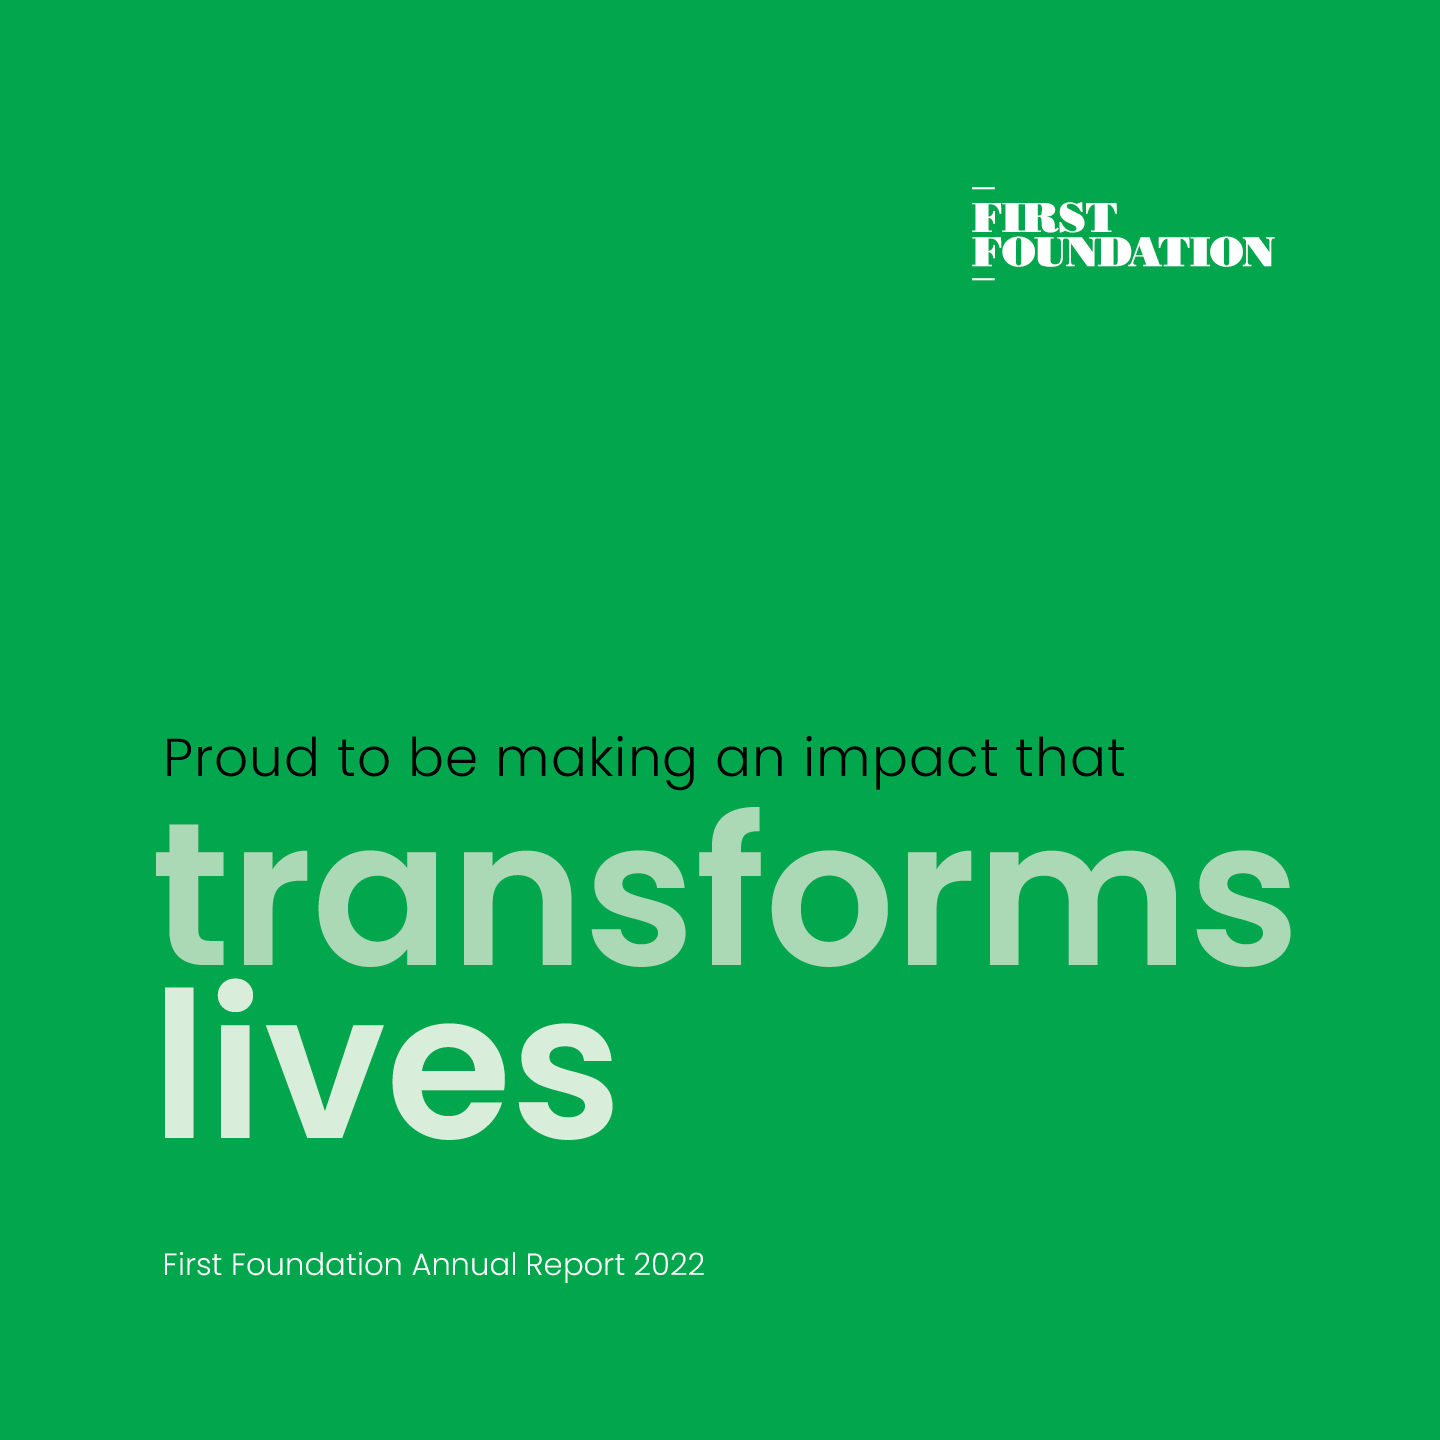 Annual Report 2022 First Foundation - Making an Impact that transforms lives